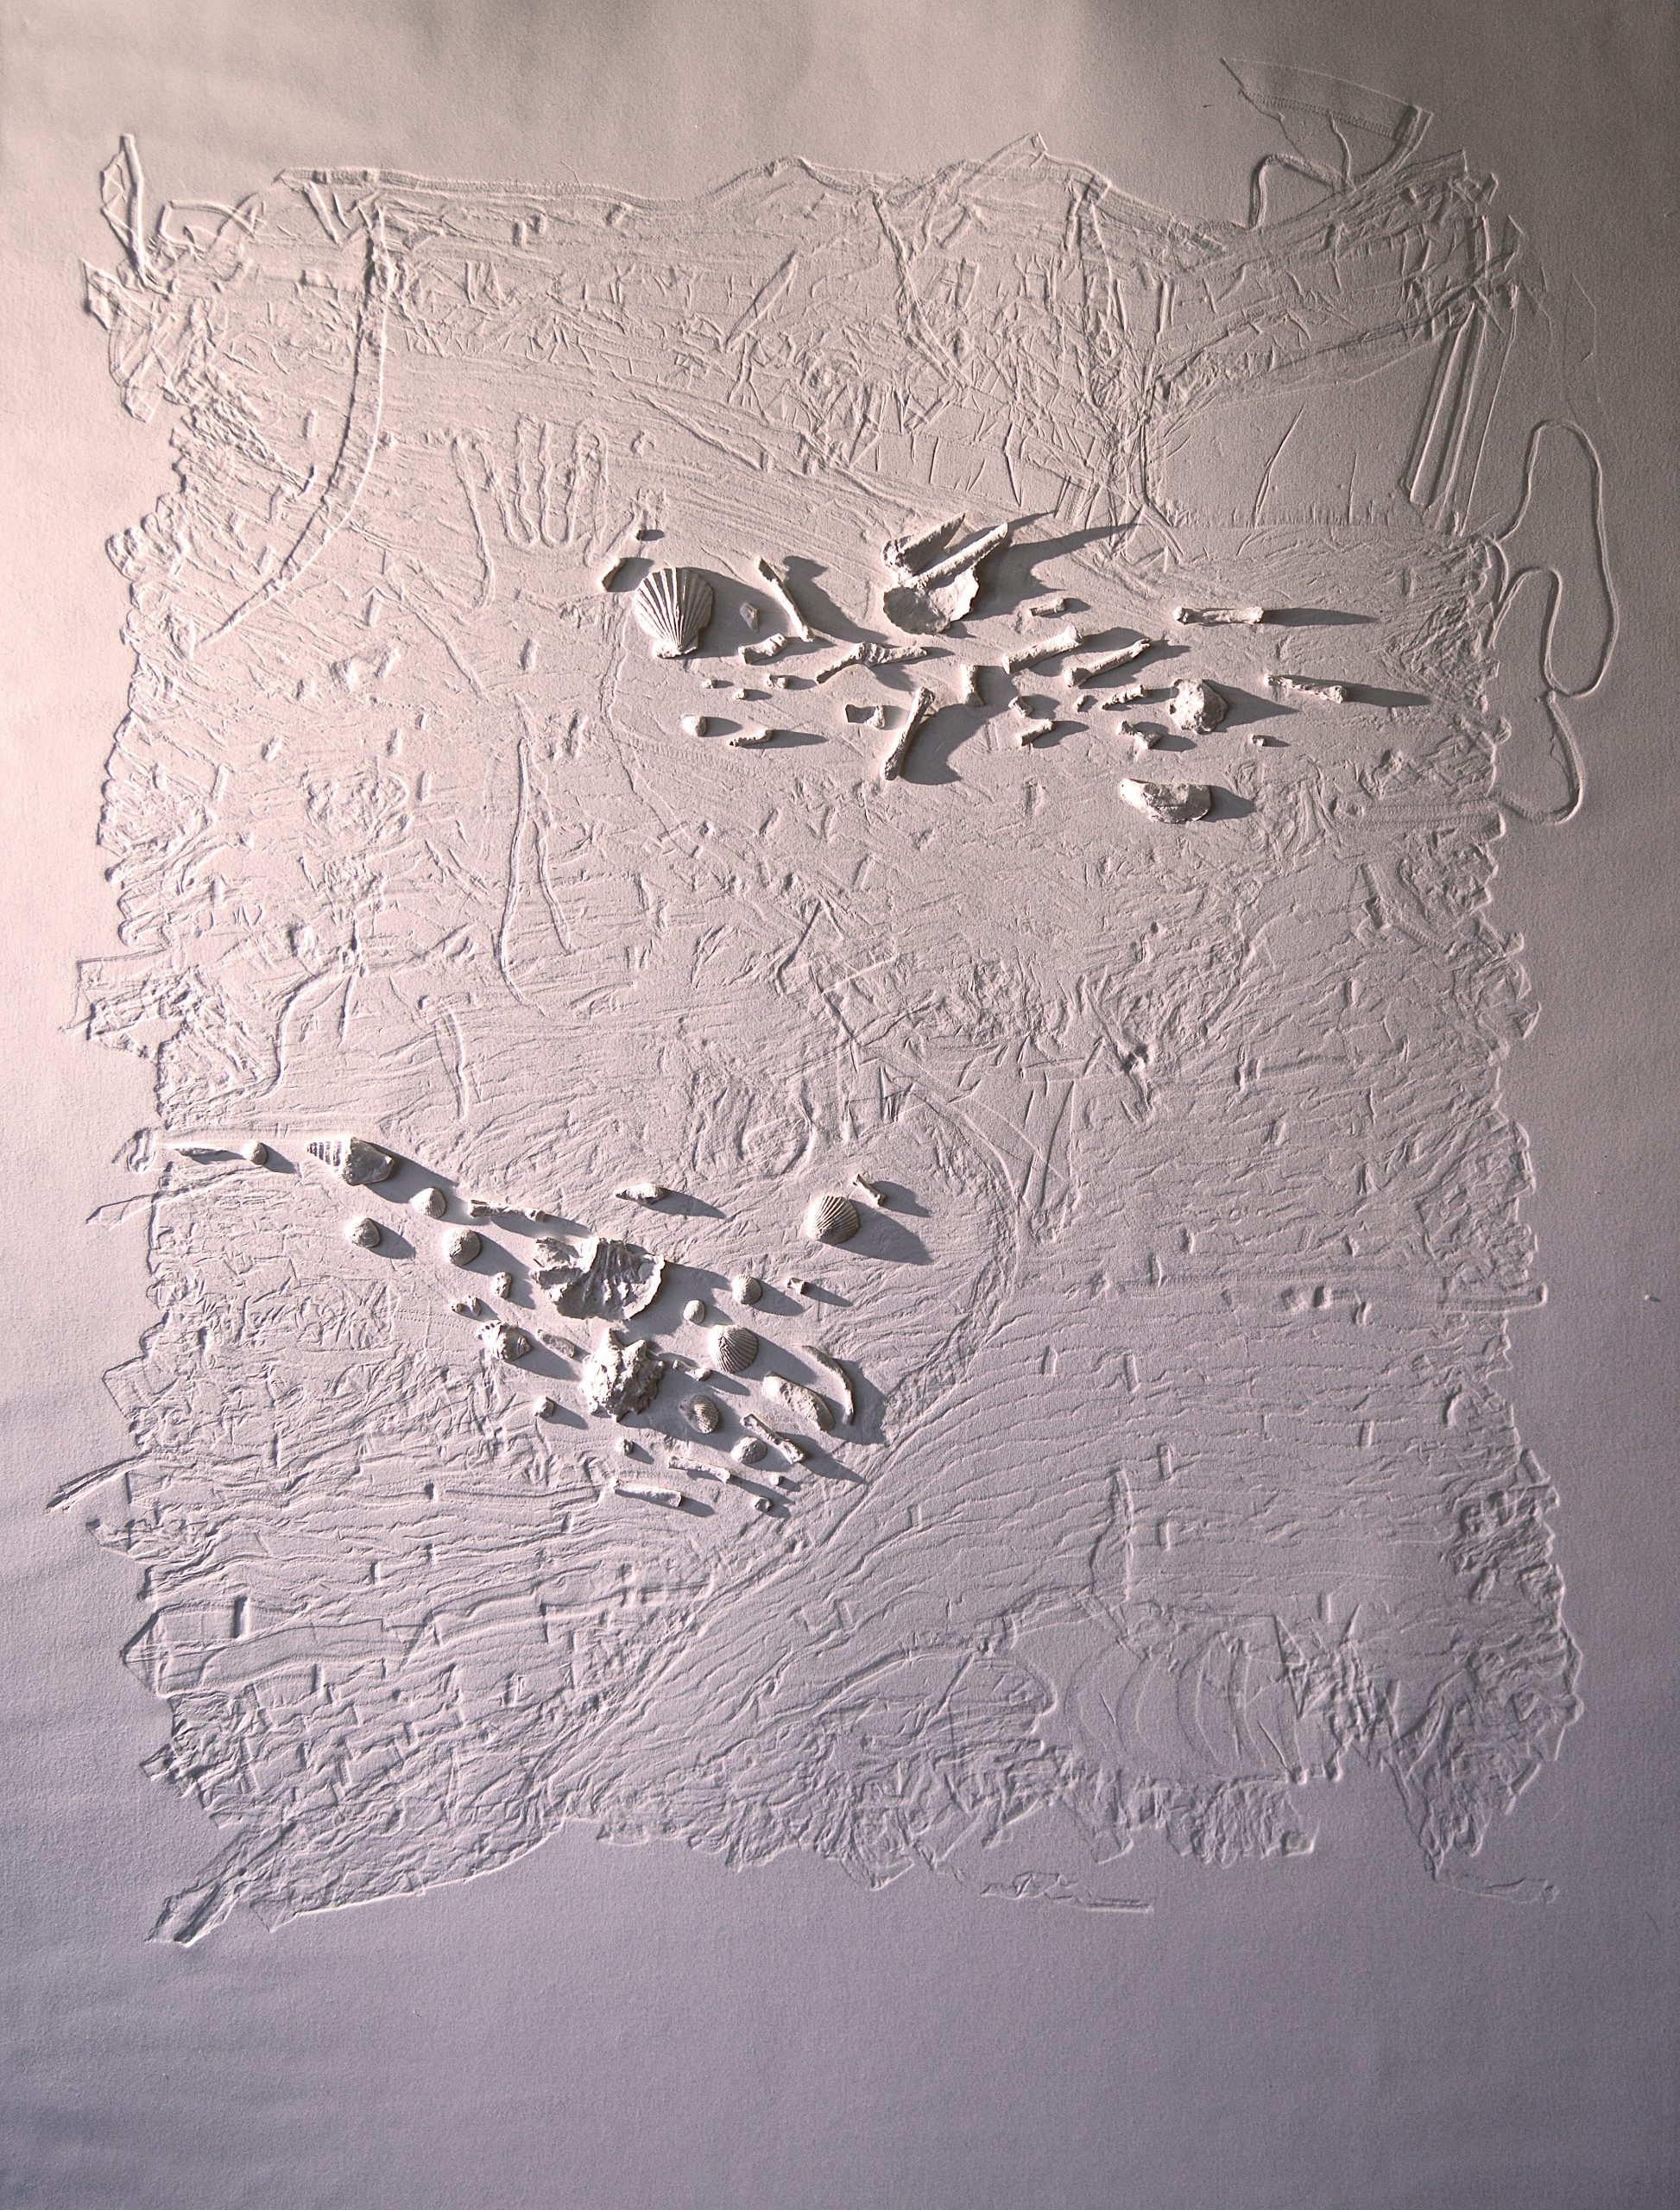 Land Memory II
110cm x 160cm
Embossing and paper sculptures